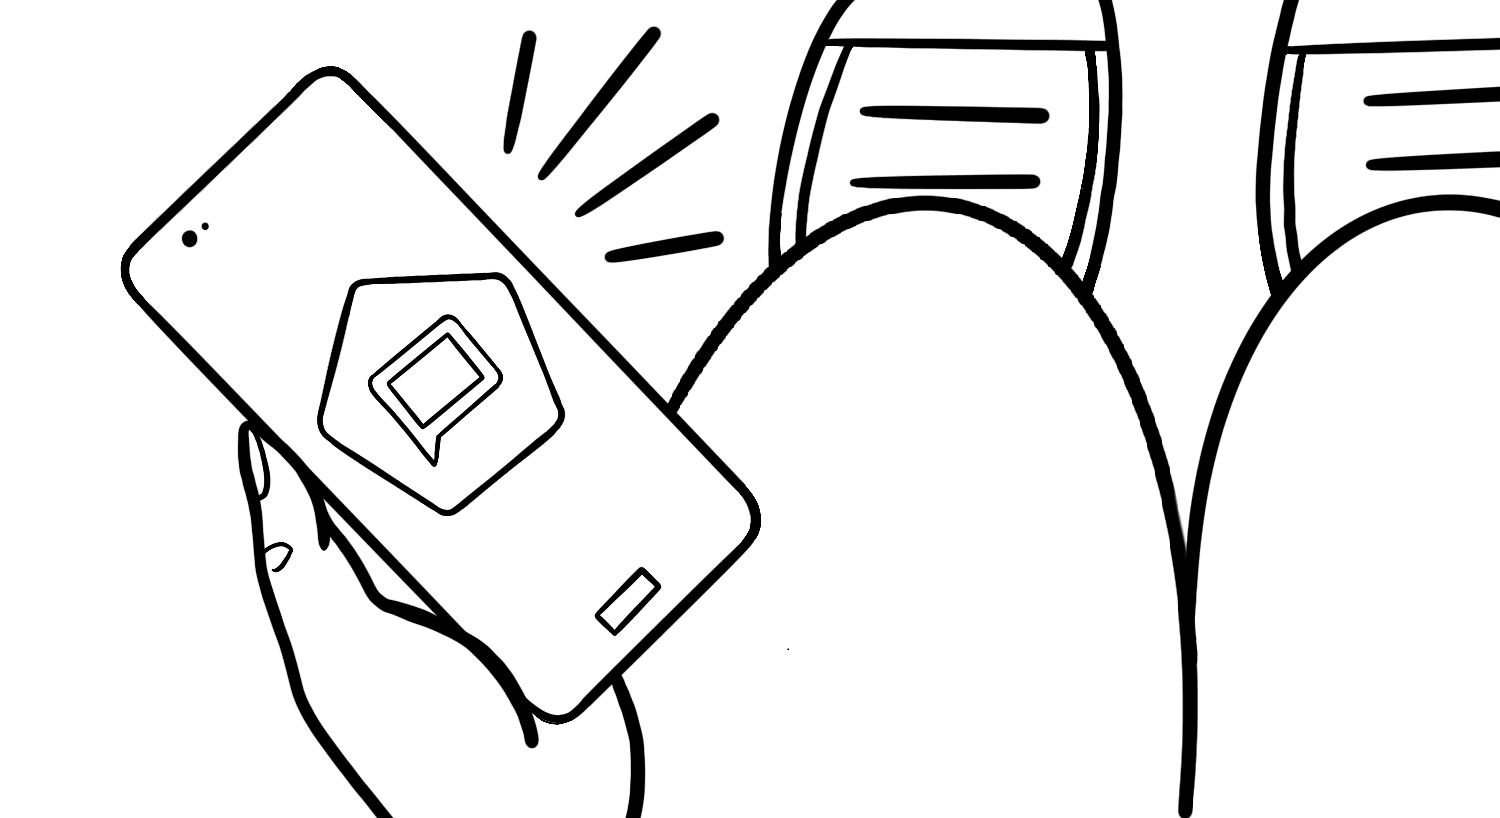 Illustration: Overhead view of a person holding a smartphone that is making sounds. The Talkback logo is being displayed. The individual’s knees and shoes are in the background.